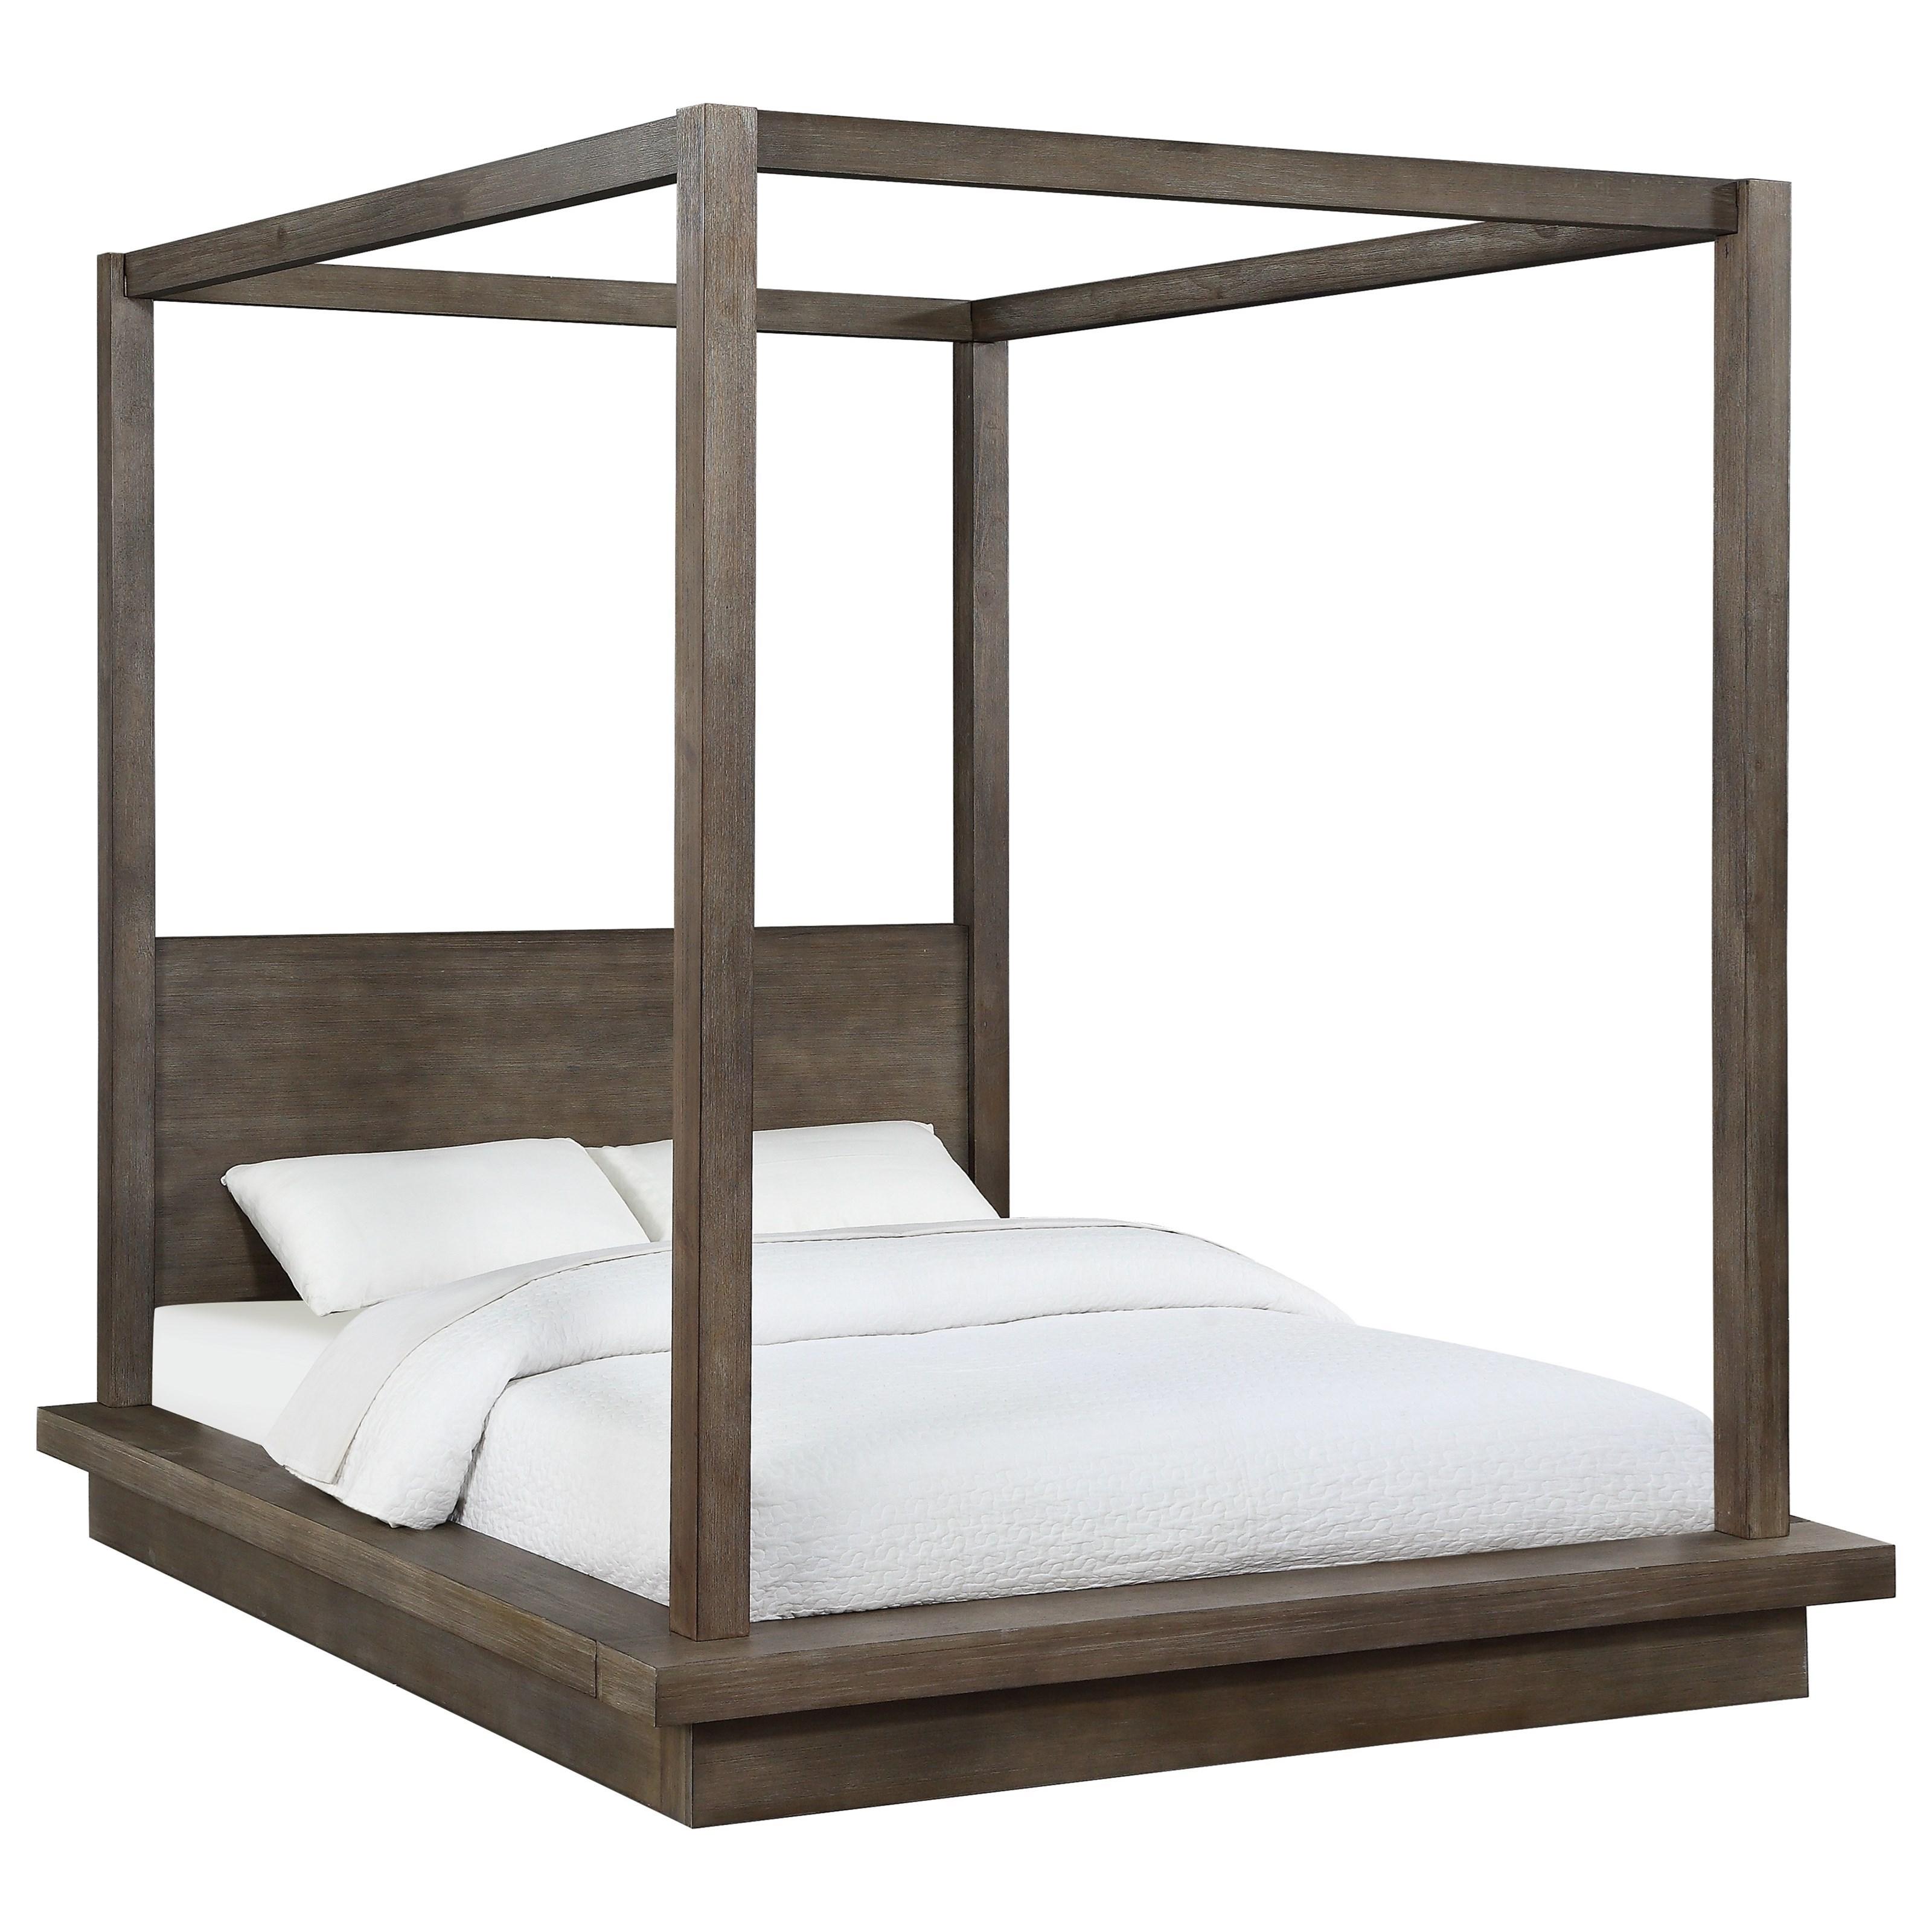 Contemporary, Rustic Canopy Bed MELBOURNE CANOPY 8D64F6 in Brown 